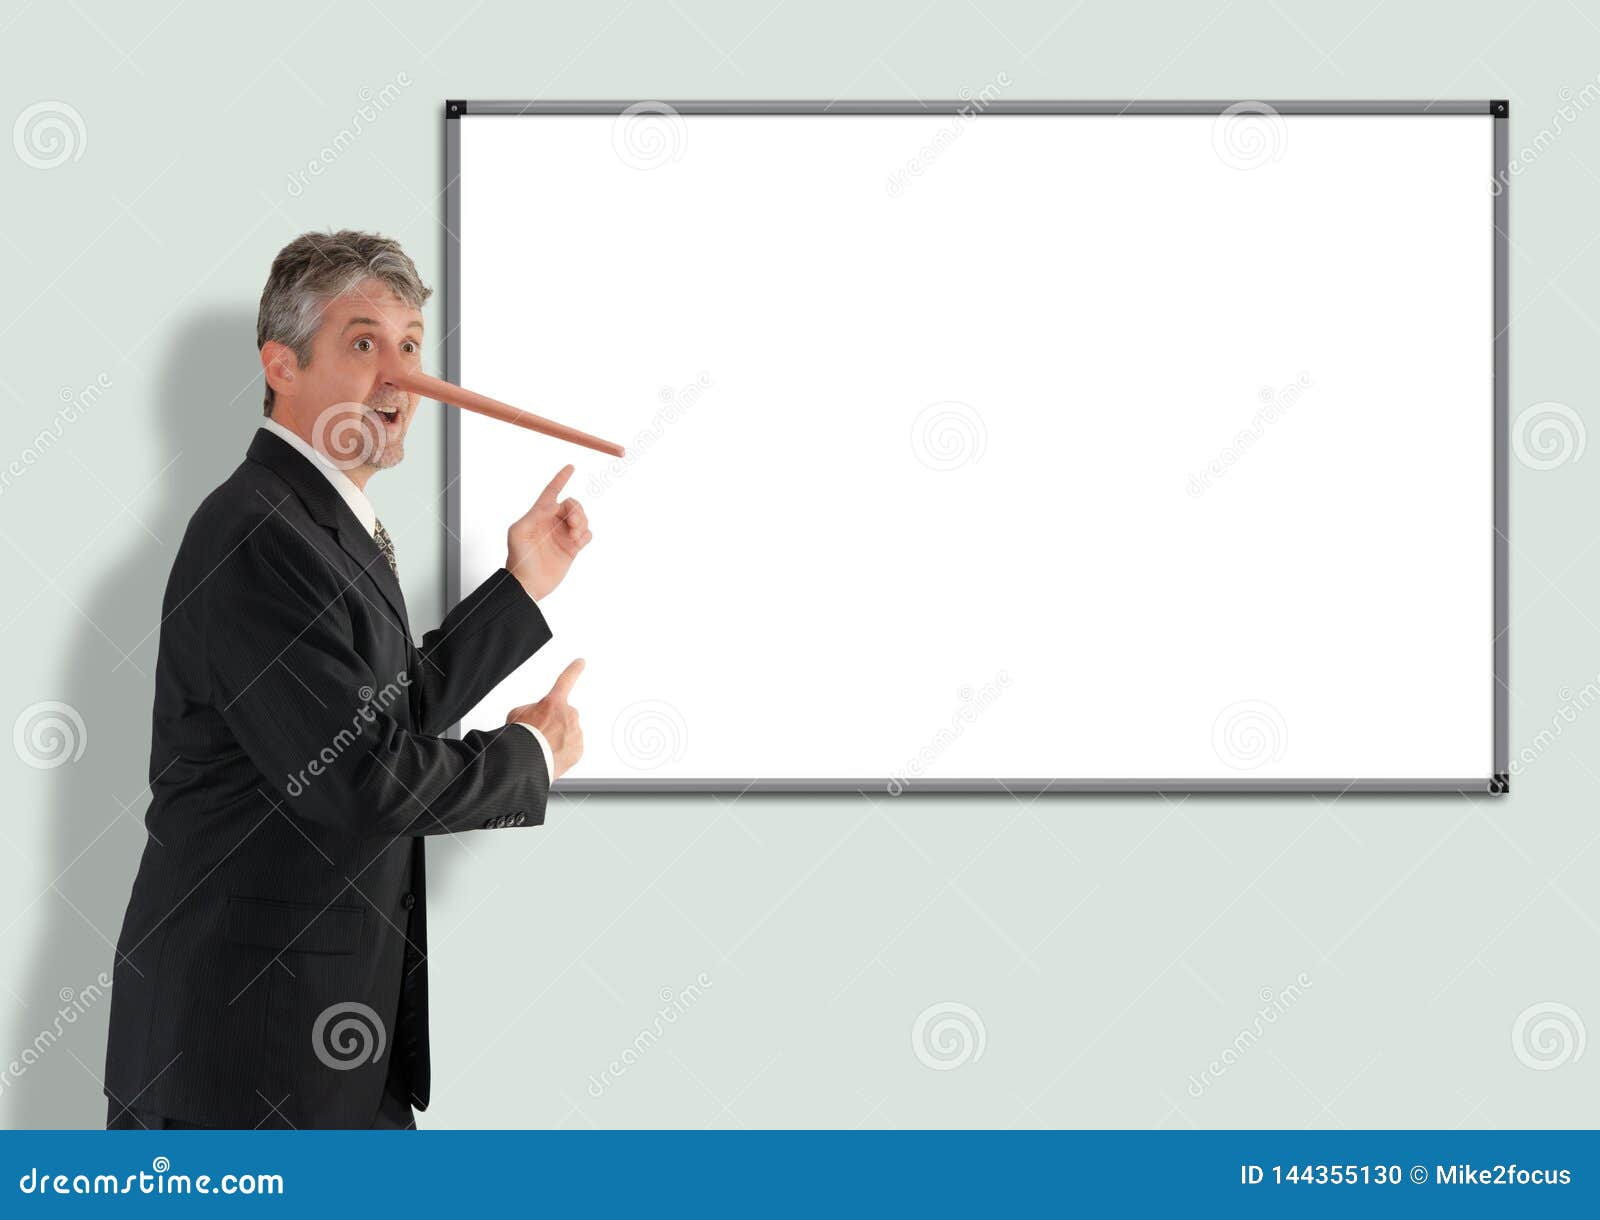 lying dishonest businessman with growing pinocchio nose pointing to blank white board